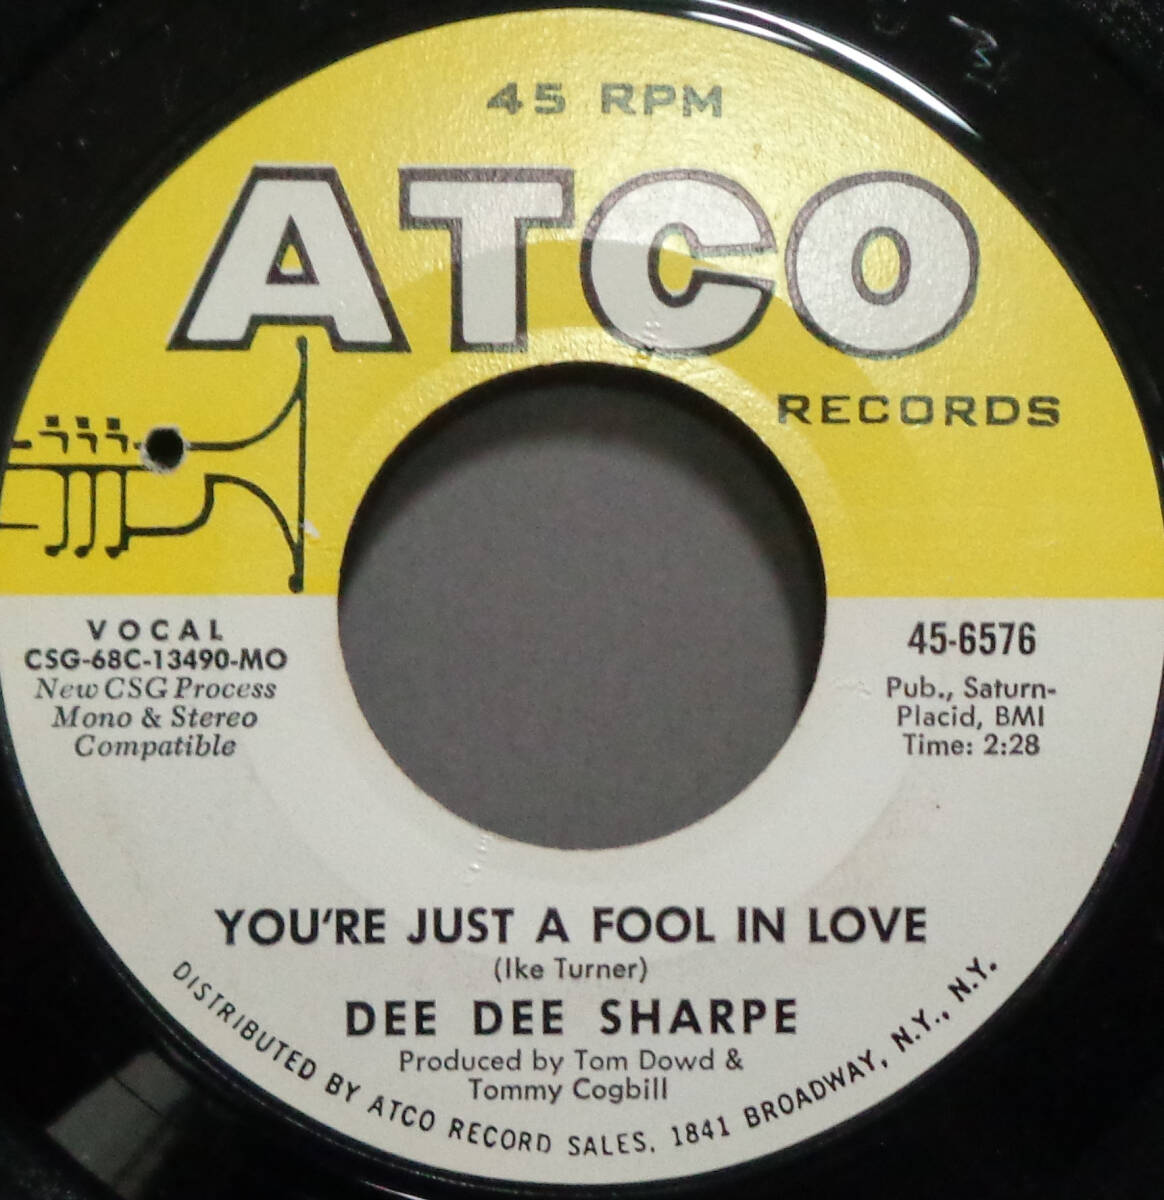 【SOUL 45】DEE DEE SHARPE - YOU'RE JUST A FOOL IN LOVE / A WOMAN WILL DO WRONG (s240301002)の画像1